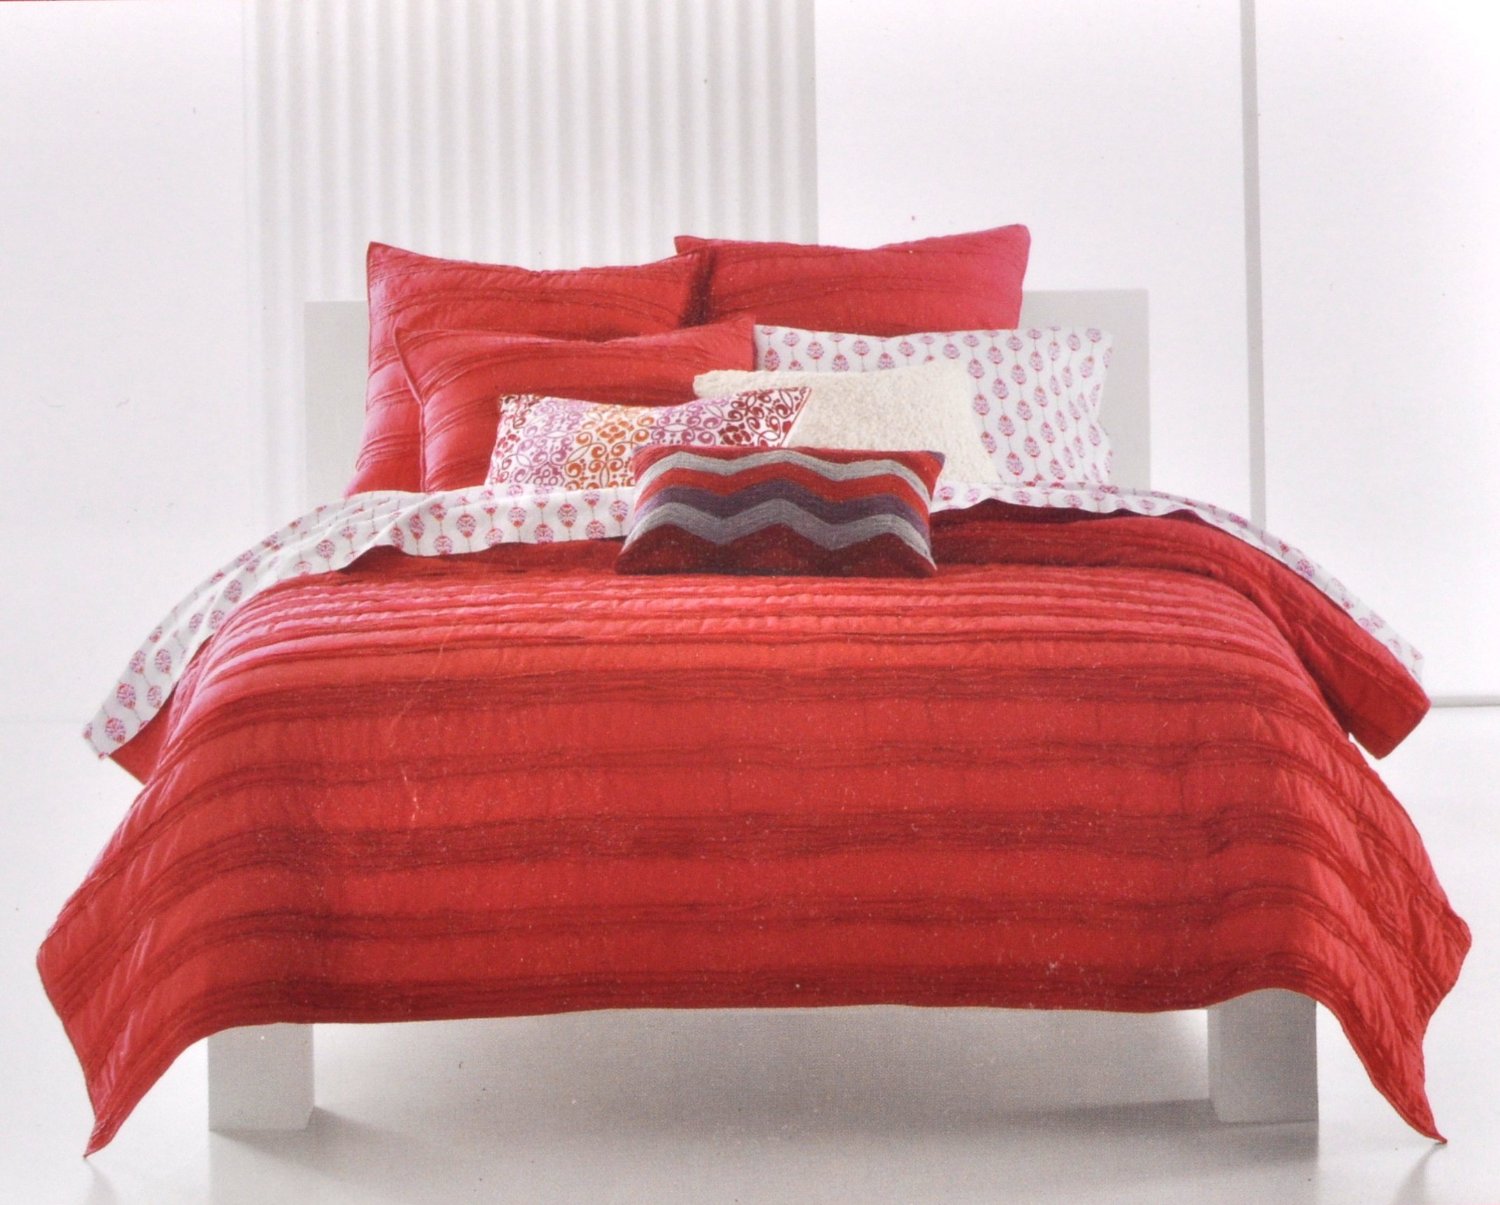 Total Fab: Coral Colored Comforter and Bedding Sets